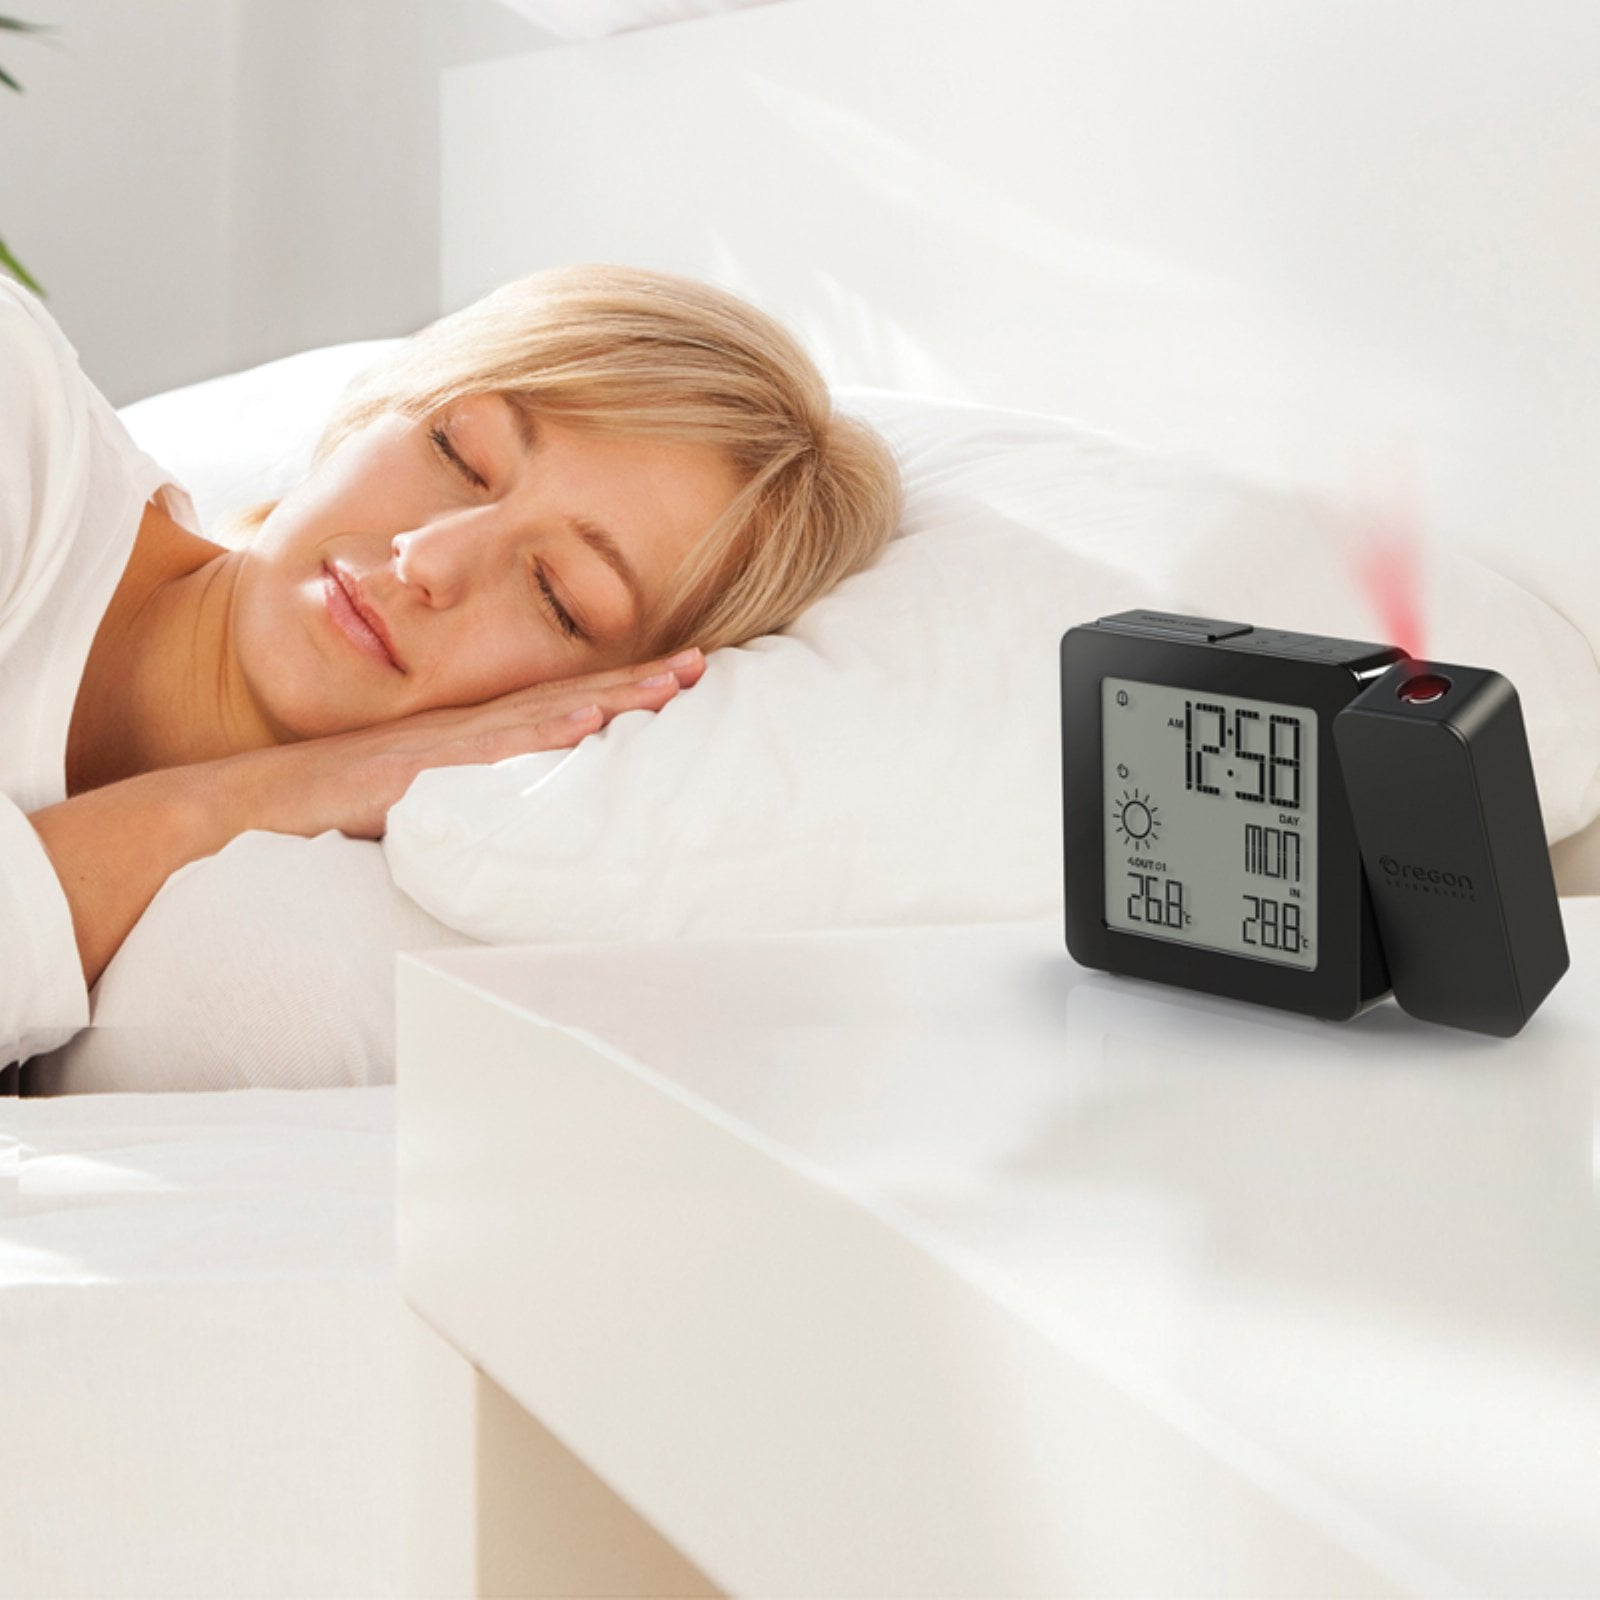 Oregon Scientific EW98 Elements Atomic Projection Alarm Clock with Indoor/Outdoor  Thermometer 